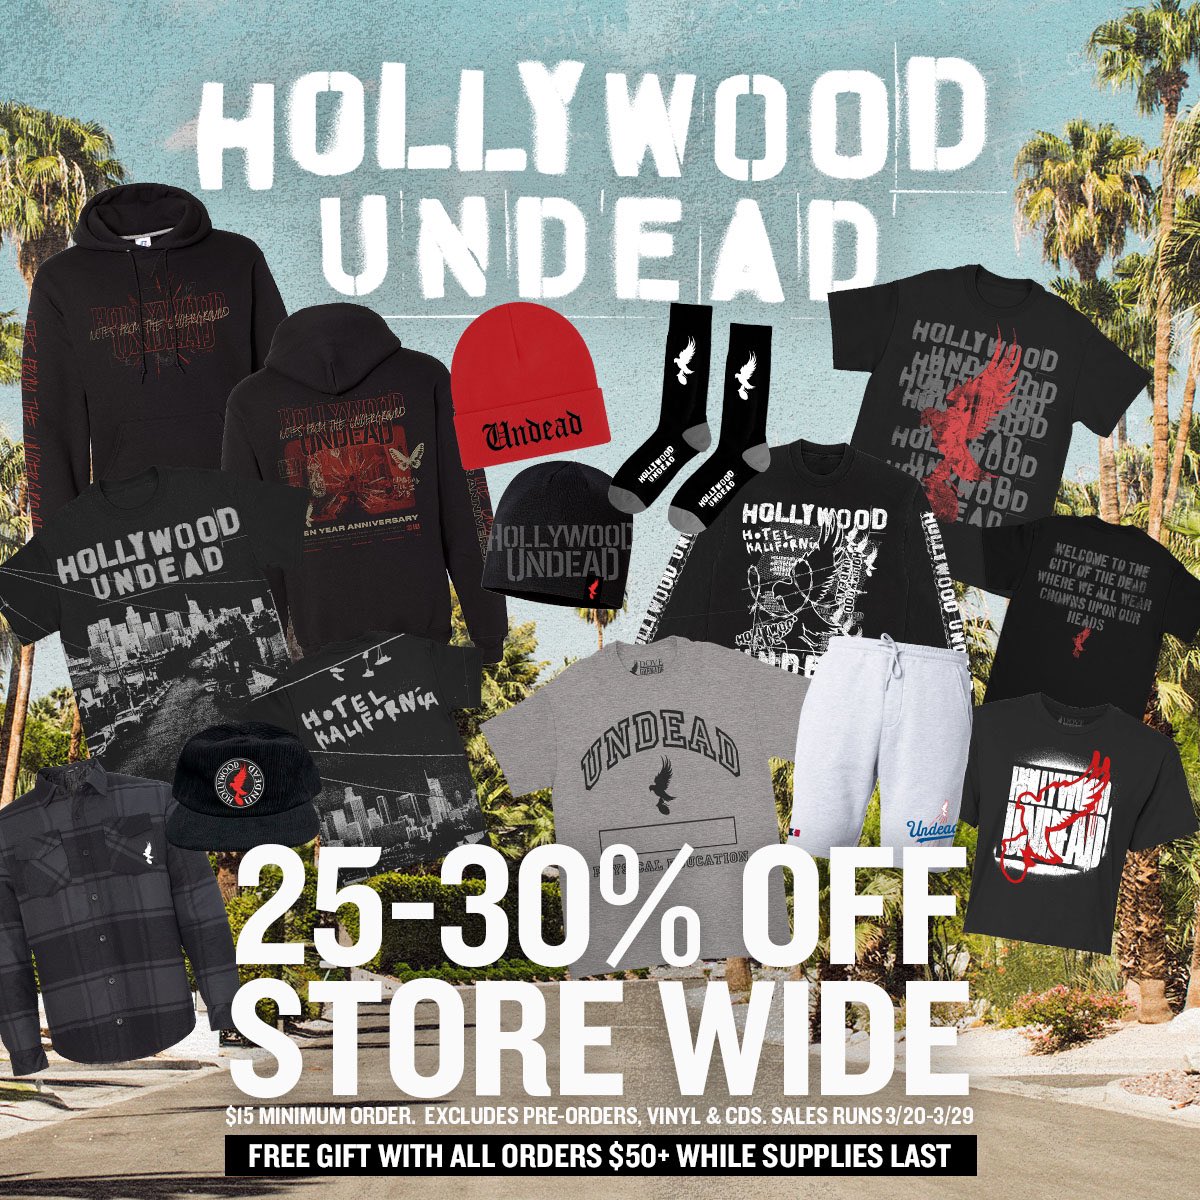 SALE your Soul 🤑 Take up to 30% off Hollywood Undead merch starting NOW SHOP THE DROP AT store.hollywoodundead.com